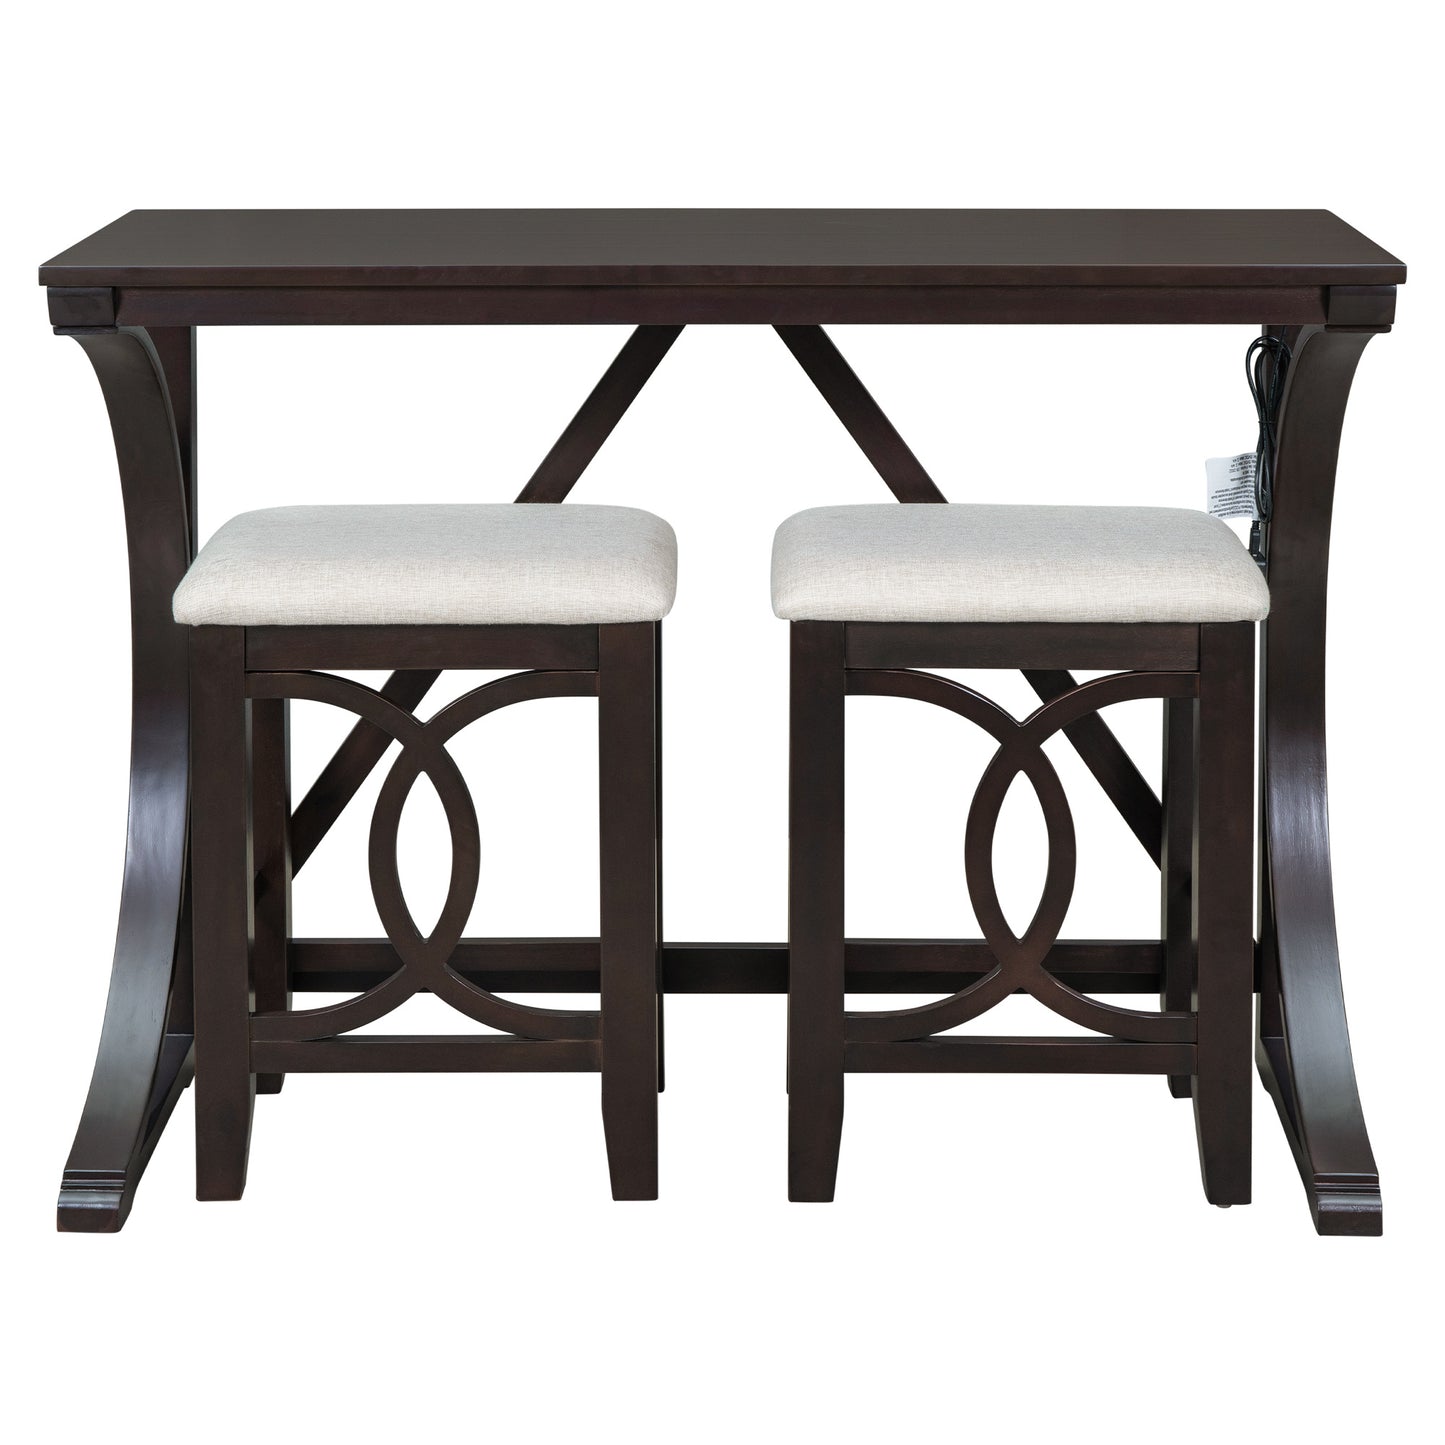 3-Piece Counter Height Dining Table Set with USB Port